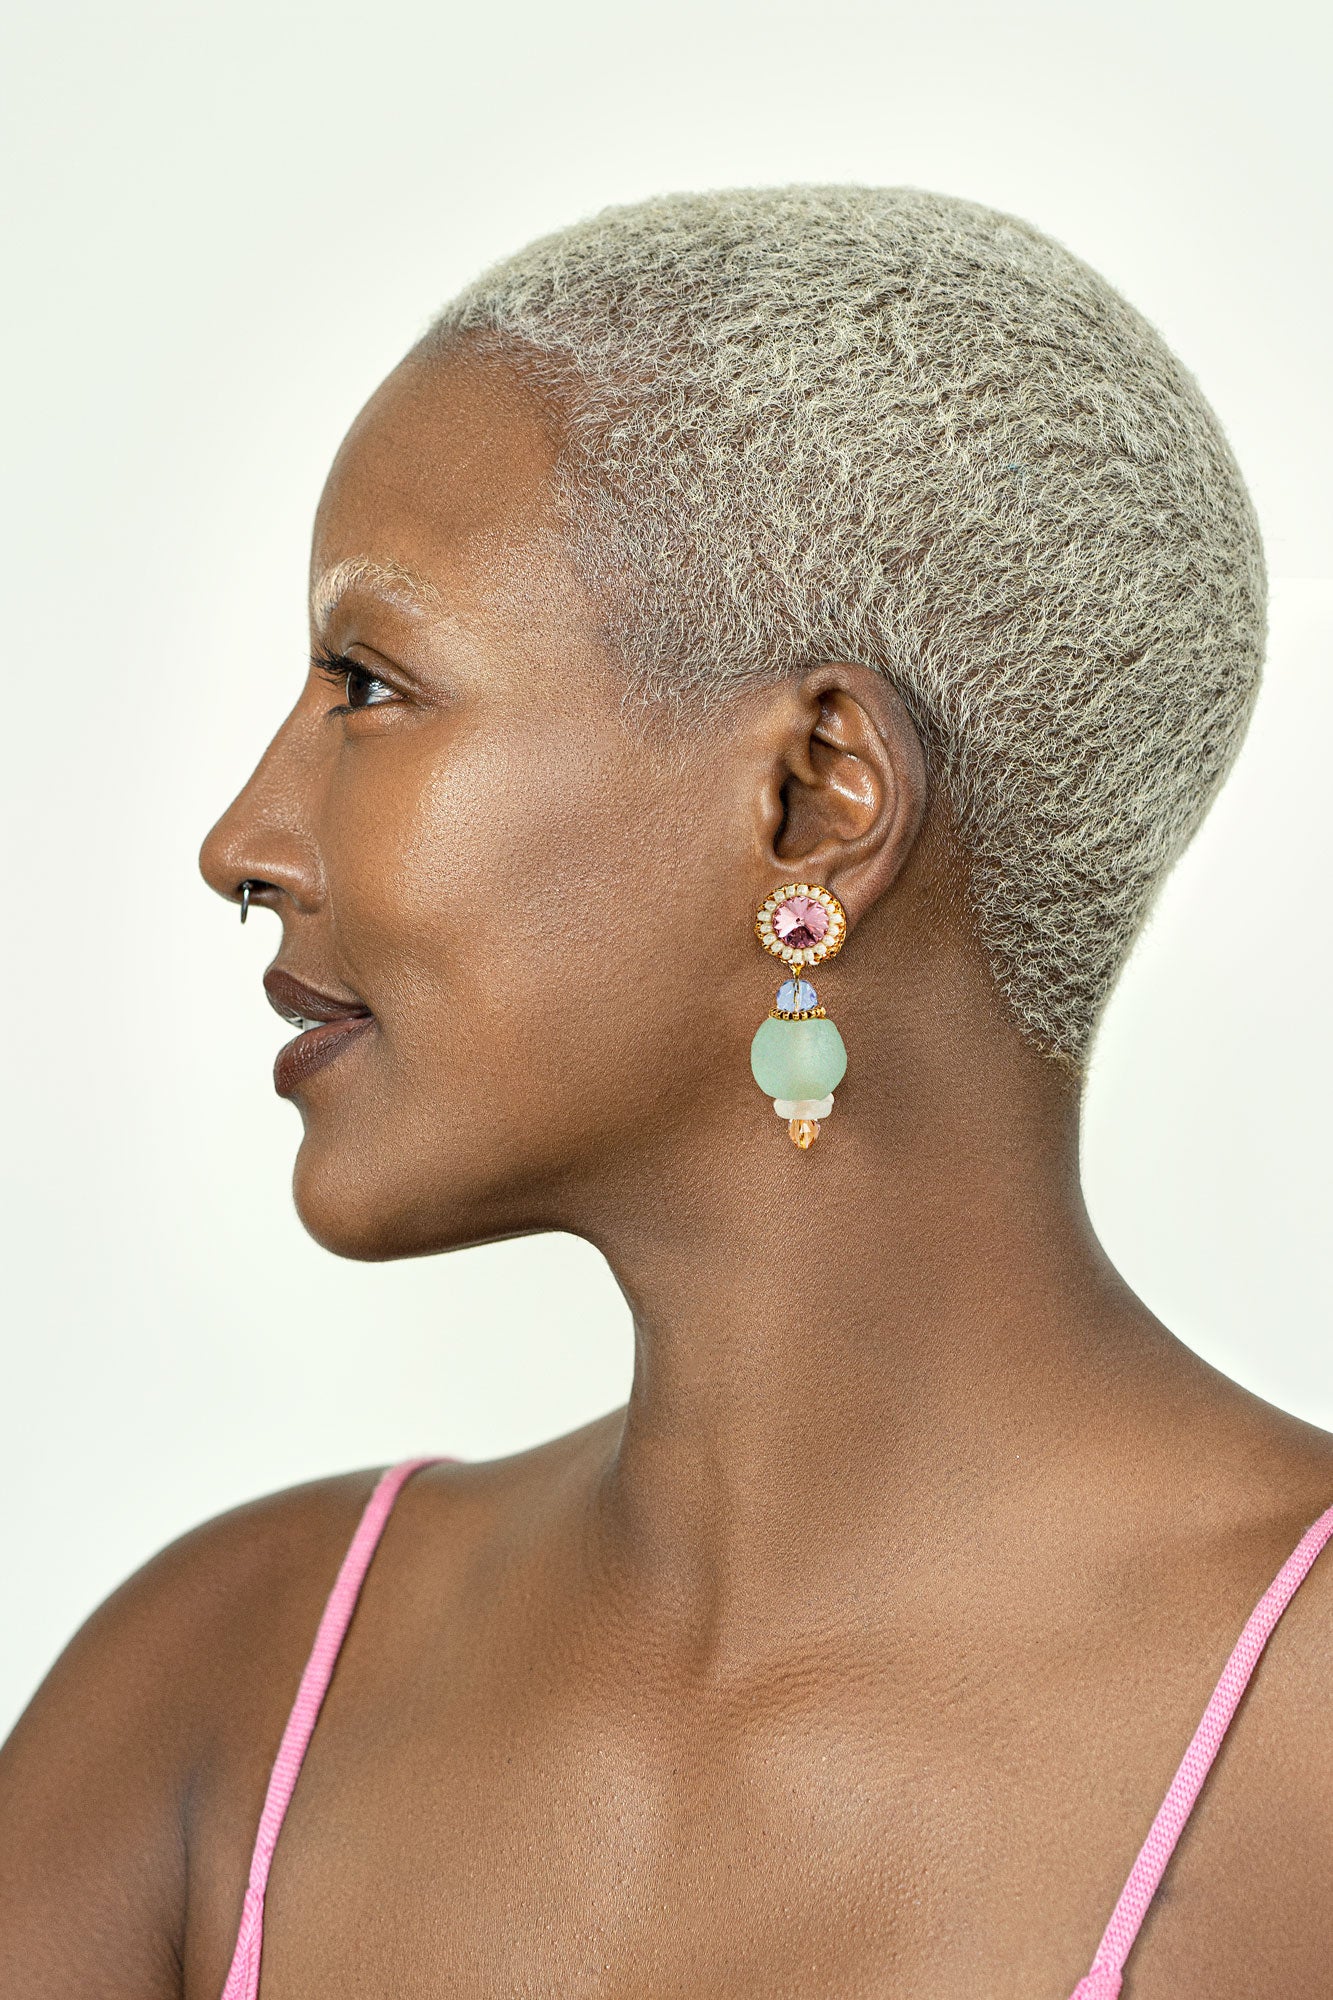 The Camille Earrings in gold or silver